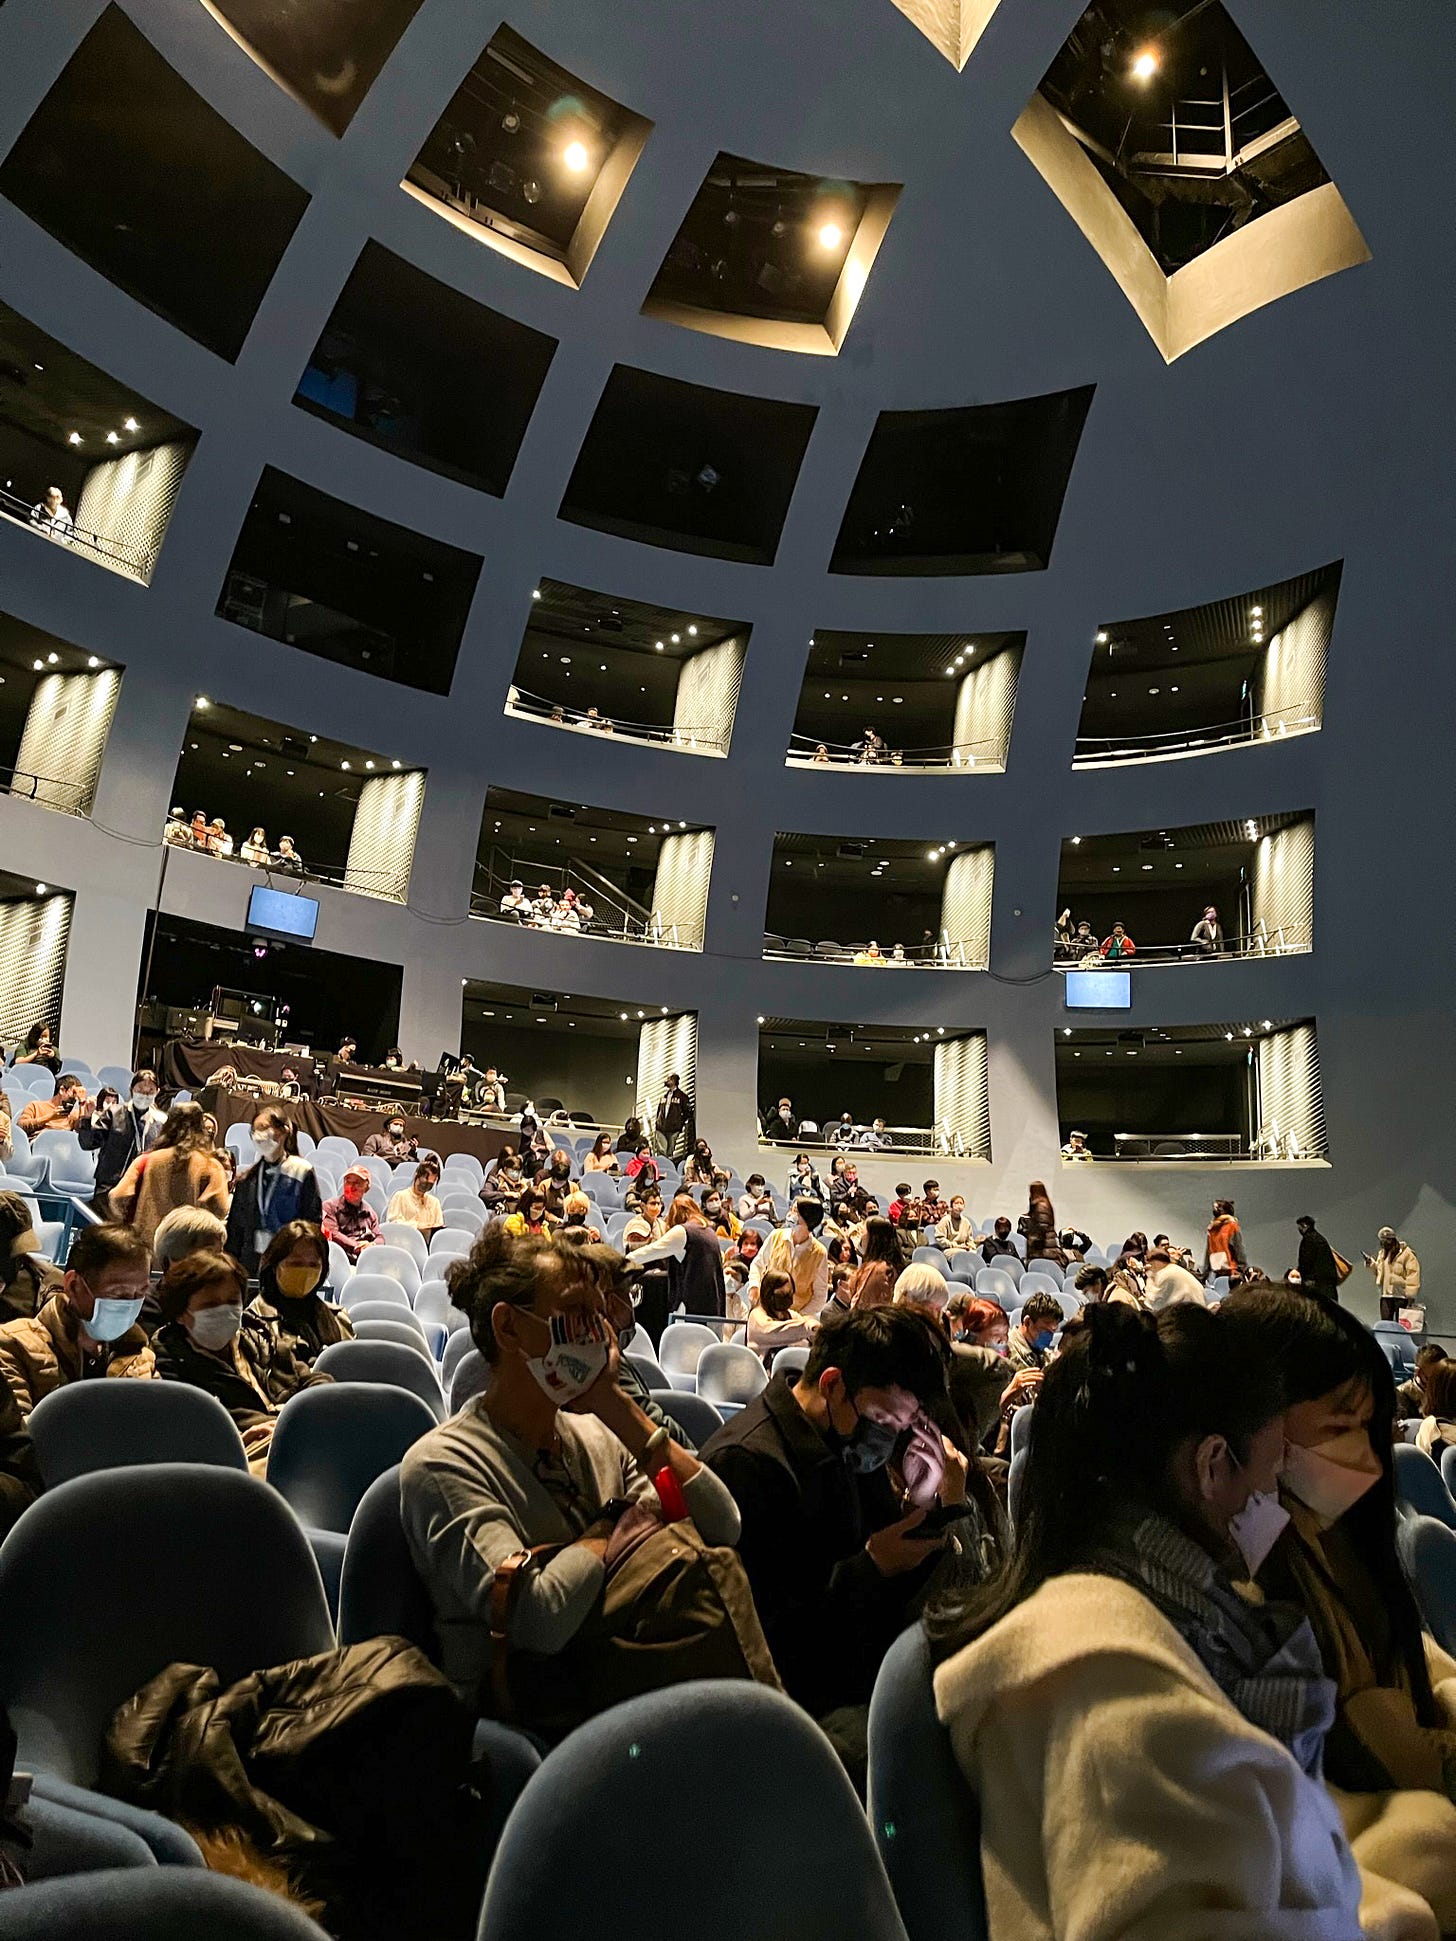 The curved walls of the main performance hall in the newly-opened Taipei Performing Arts Center